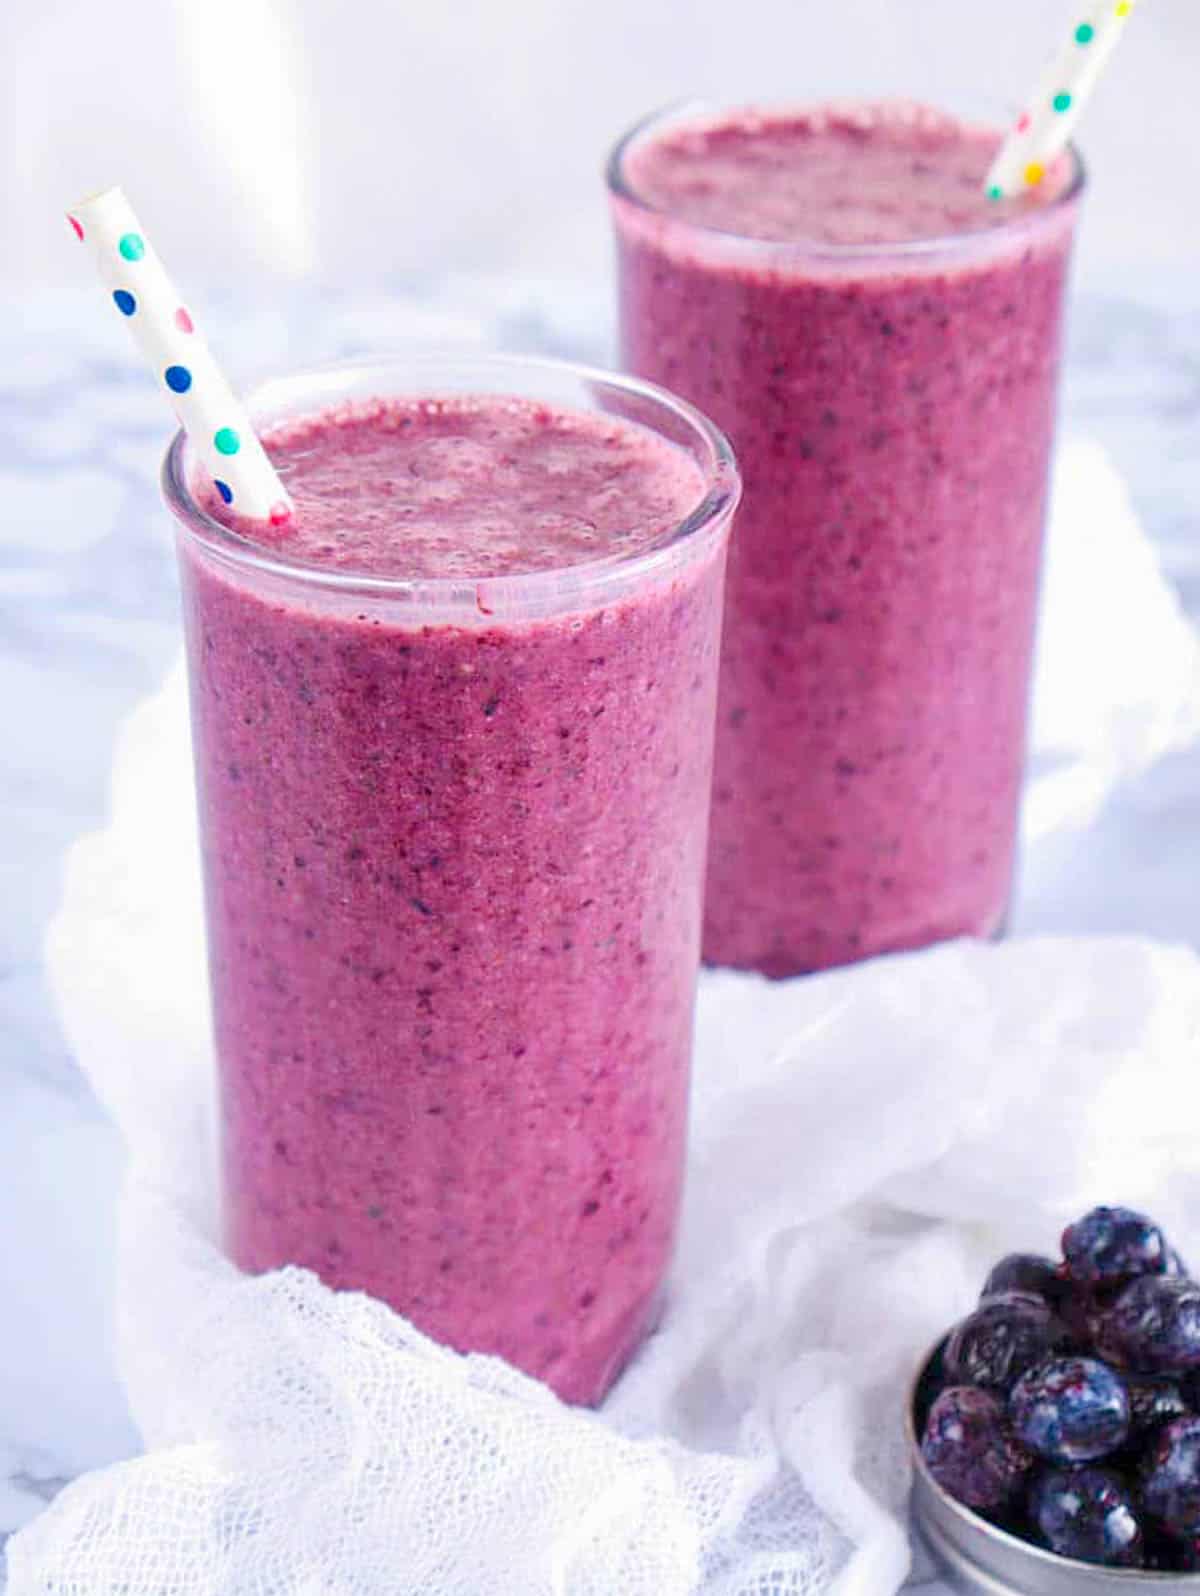 Blueberry pineapple smoothie in two glasses with a straw against a grey background.